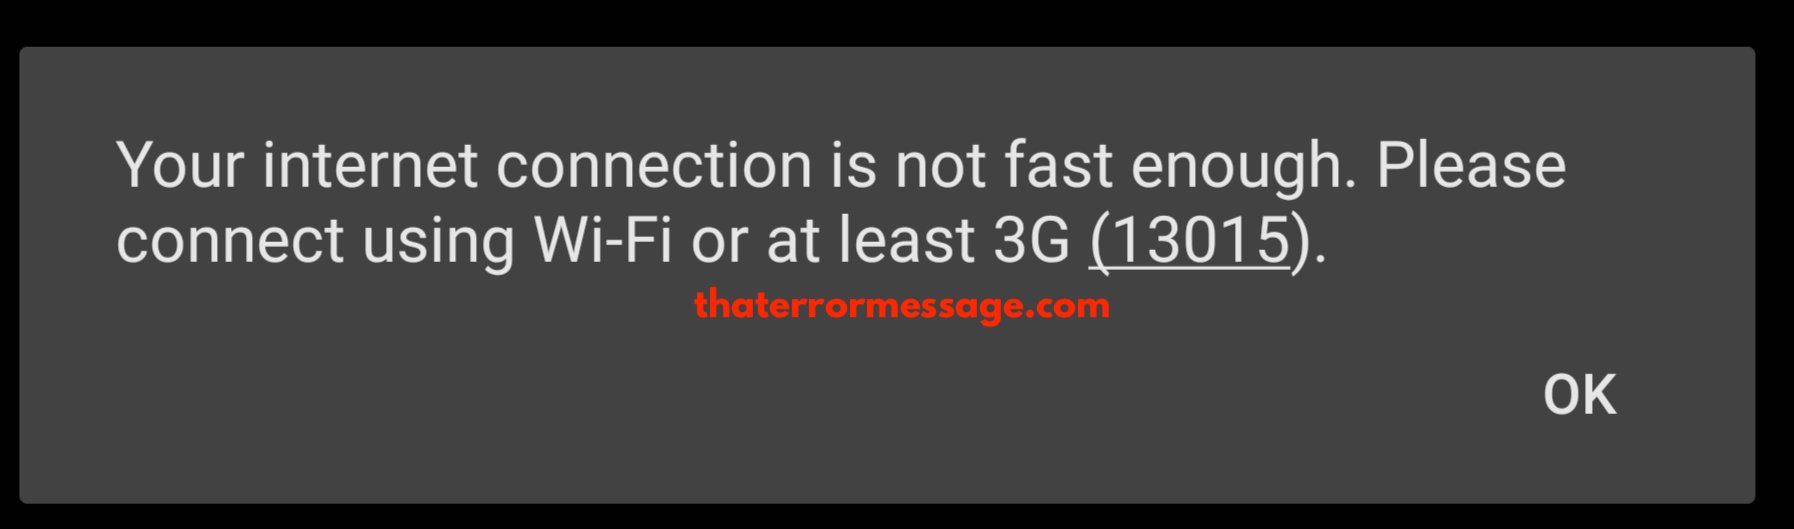 Your Internet Connection Is Not Fast Enough Netflix